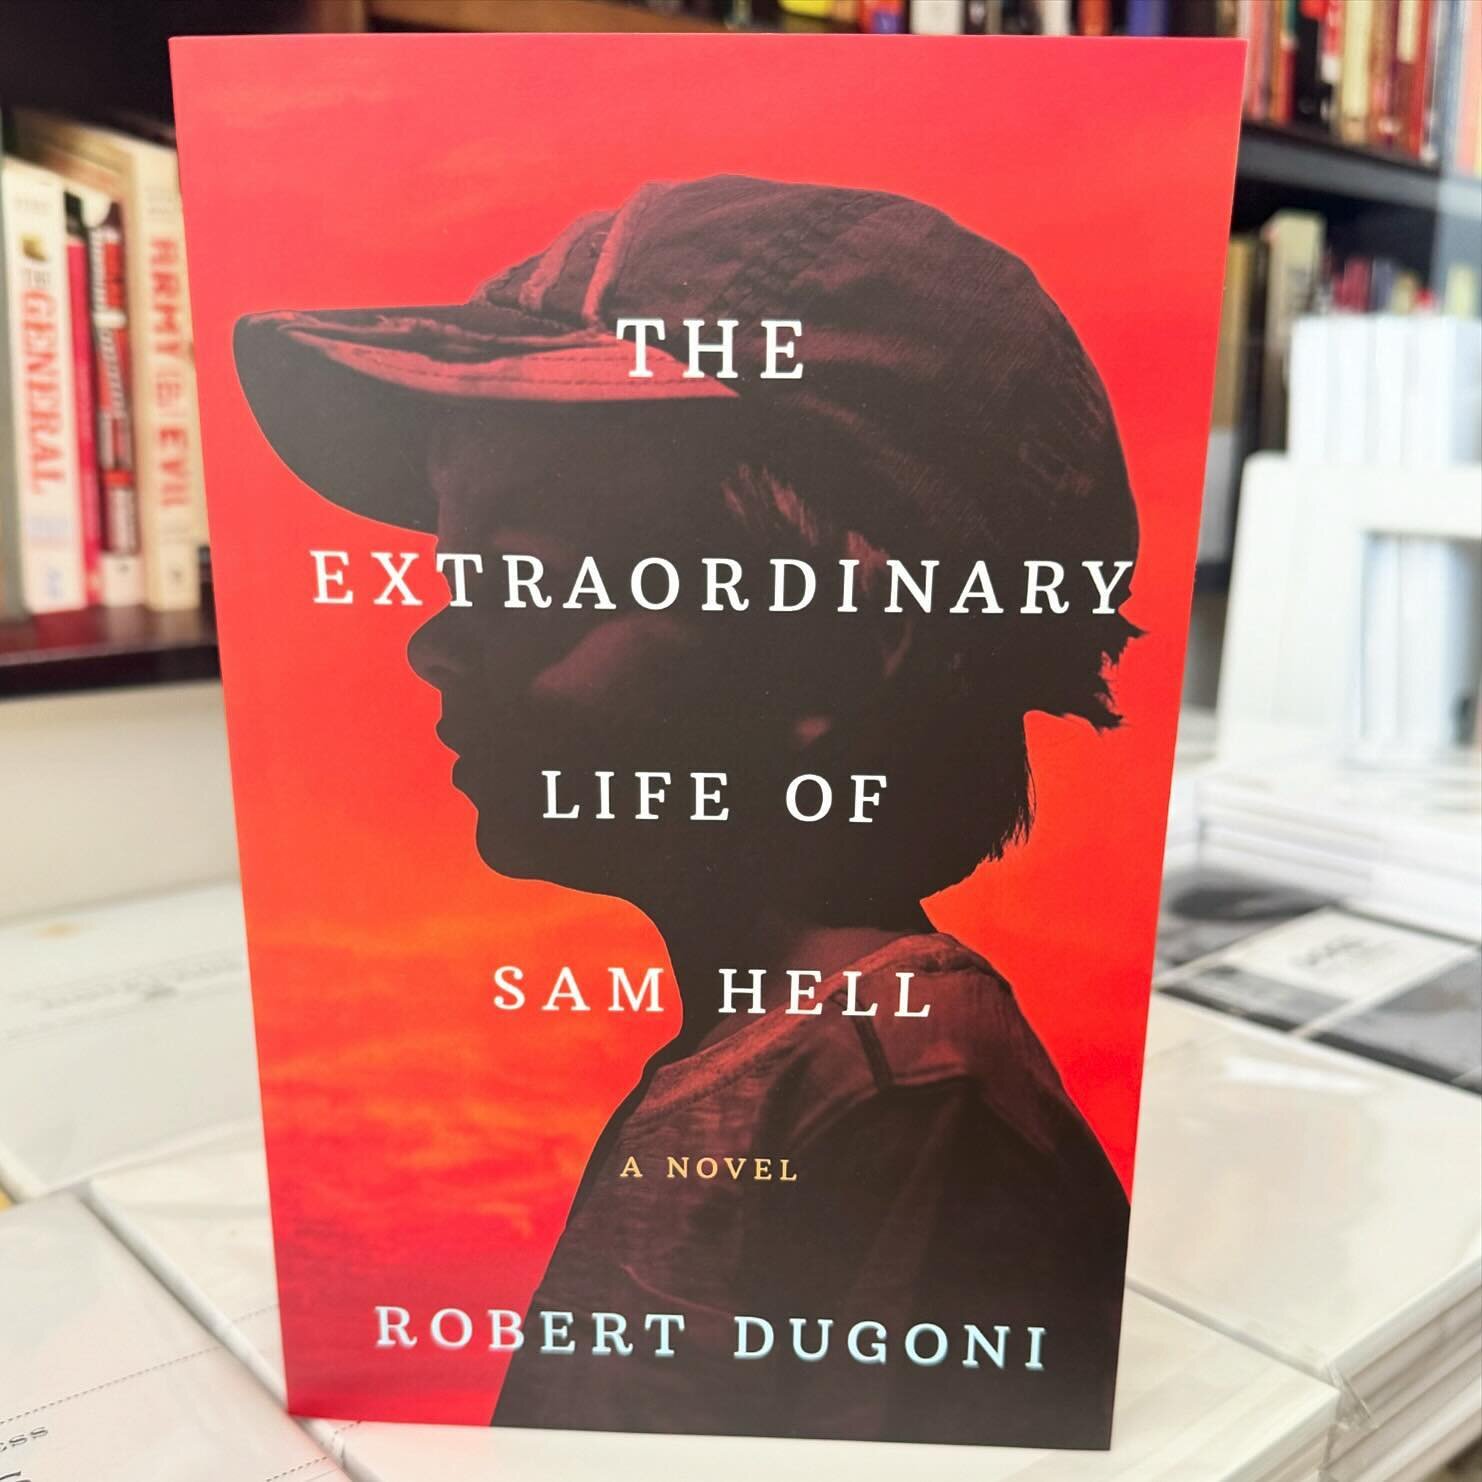 Going on spring break soon? Looking for a good beach book? 🏝️ Please consider The Extraordinary Life of Sam Hell. We loved it. Sam is a young boy in California, born with red pupils. You can only imagine what that must have been like for him as a ch